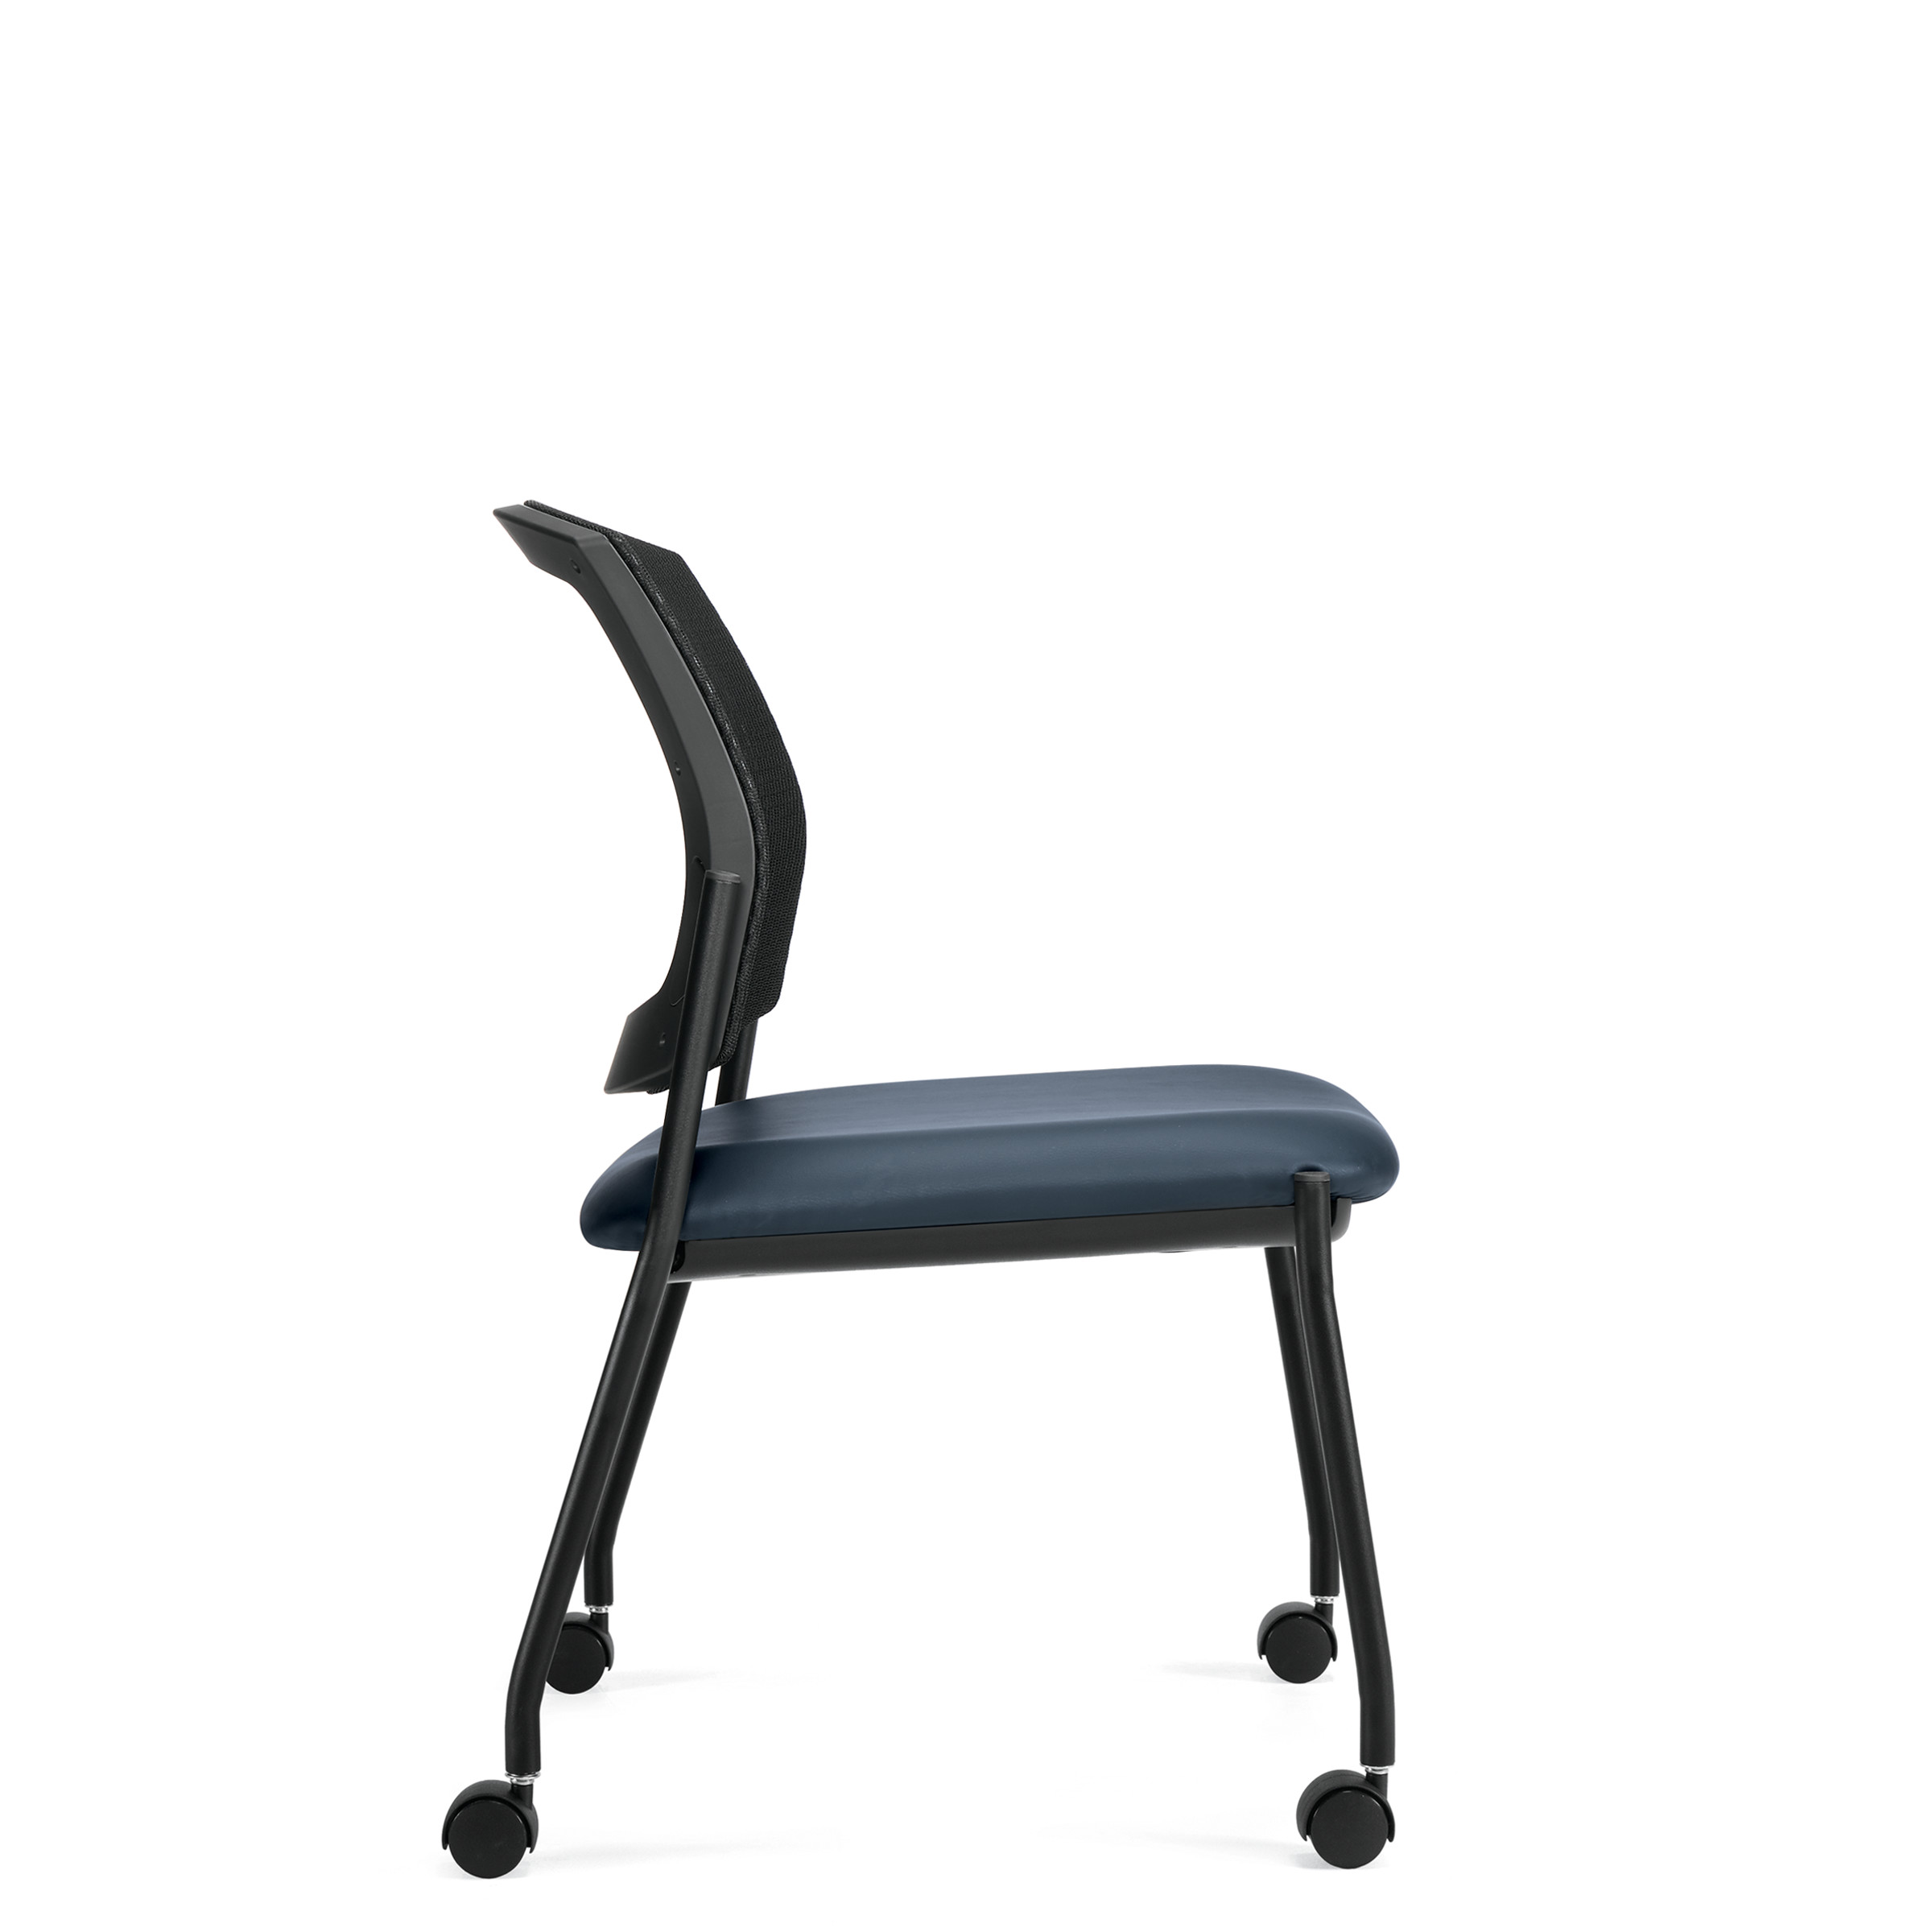 Ibex | Upholstered Seat & Mesh Back Armless Guest Chair on Casters